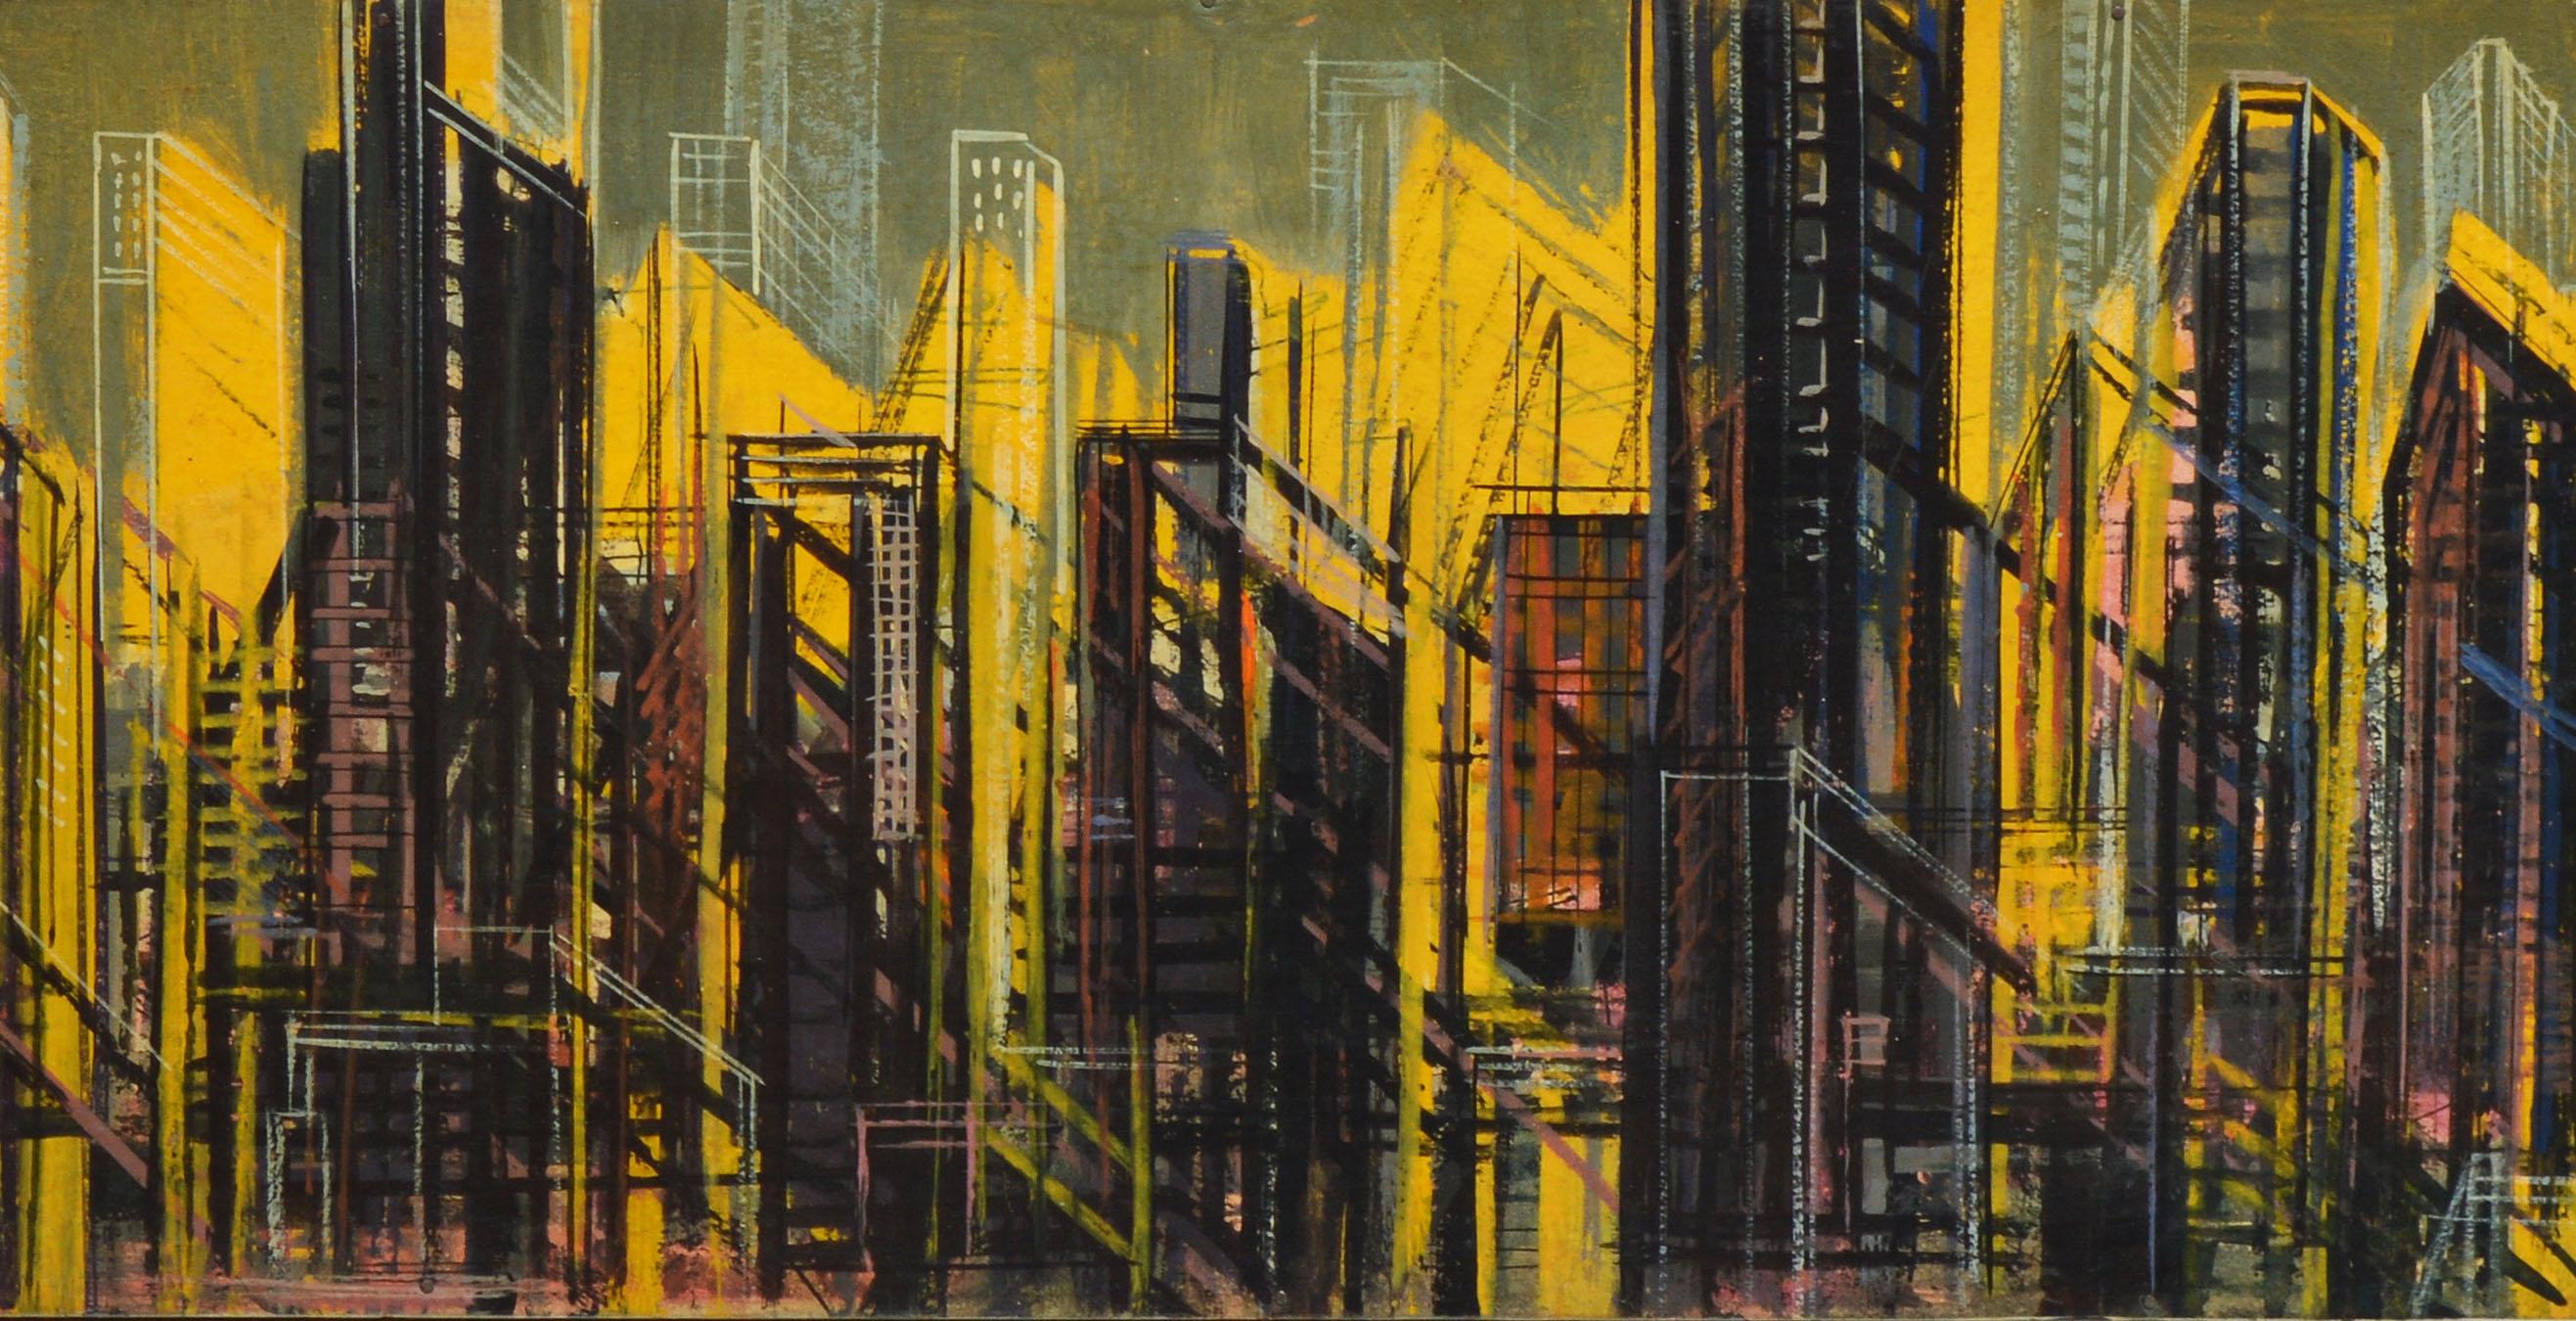 Vintage mid century modern abstracted cityscape by Edmund E Niemann  (1909 - 2005).  Oil on board, circa 1940.  Signed.  Displayed in a period modern frame.  Image, 16